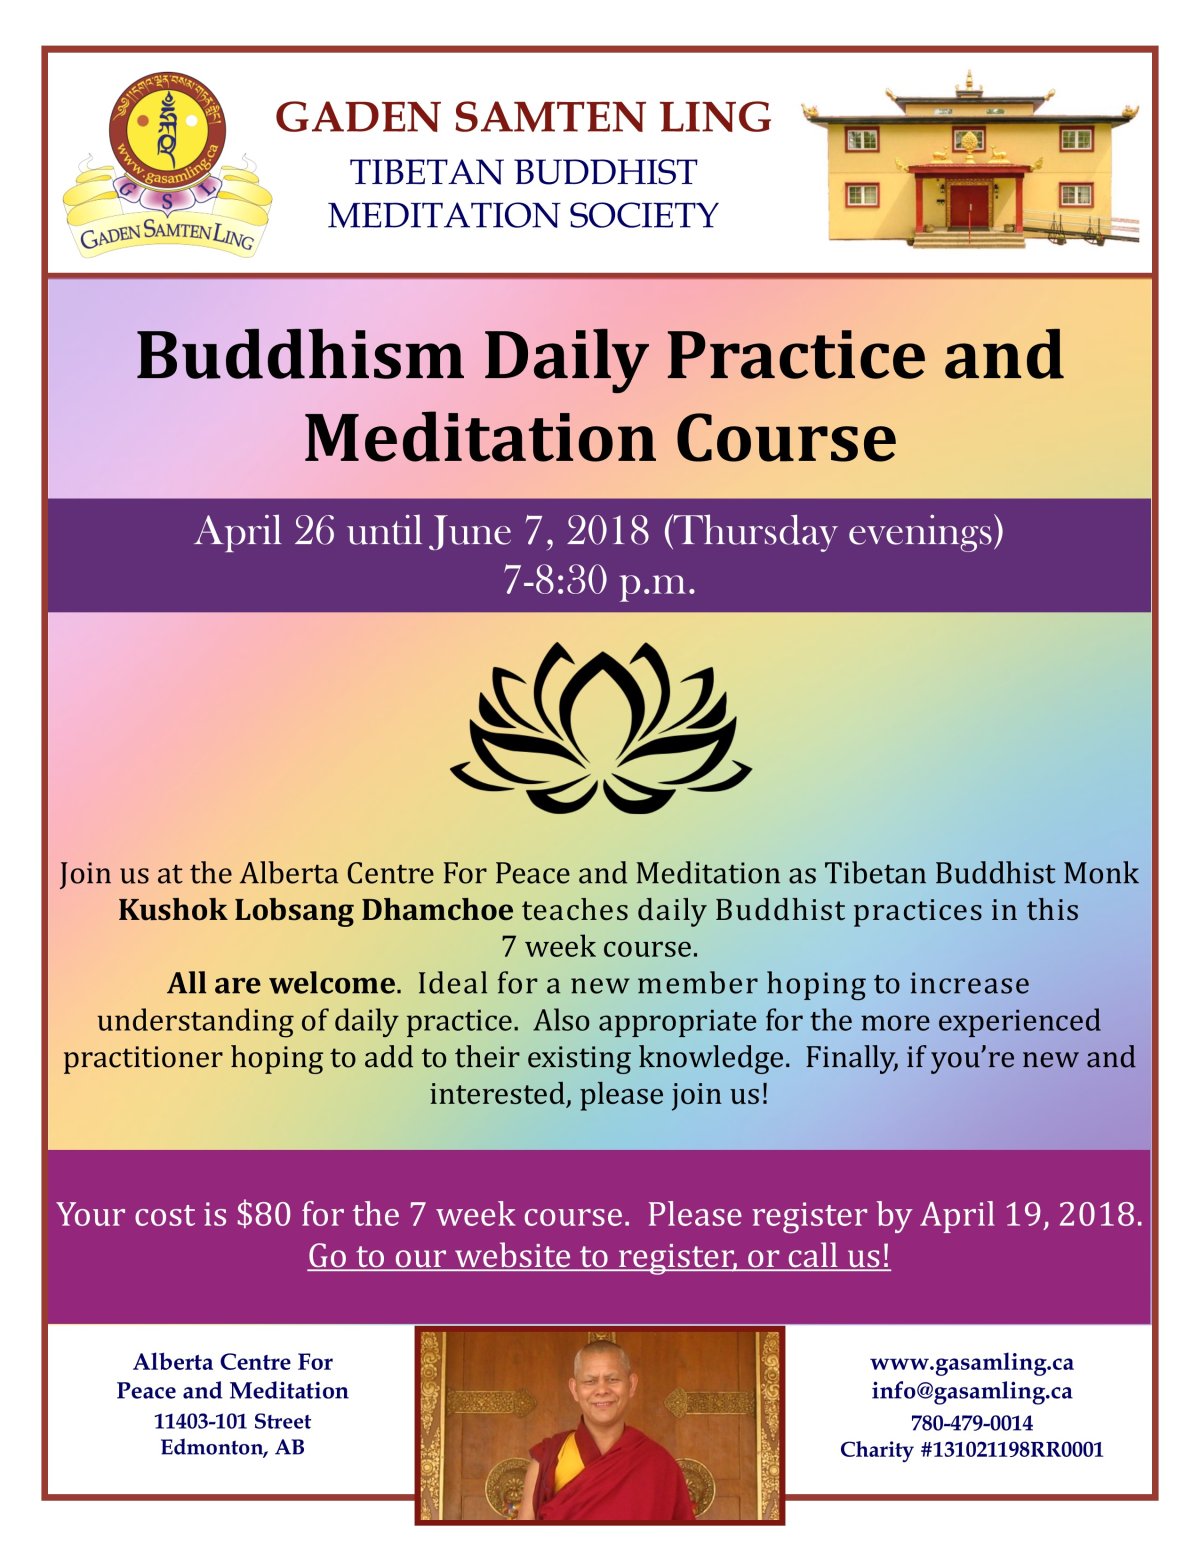 Buddhism Daily Practice and Meditation Course - image